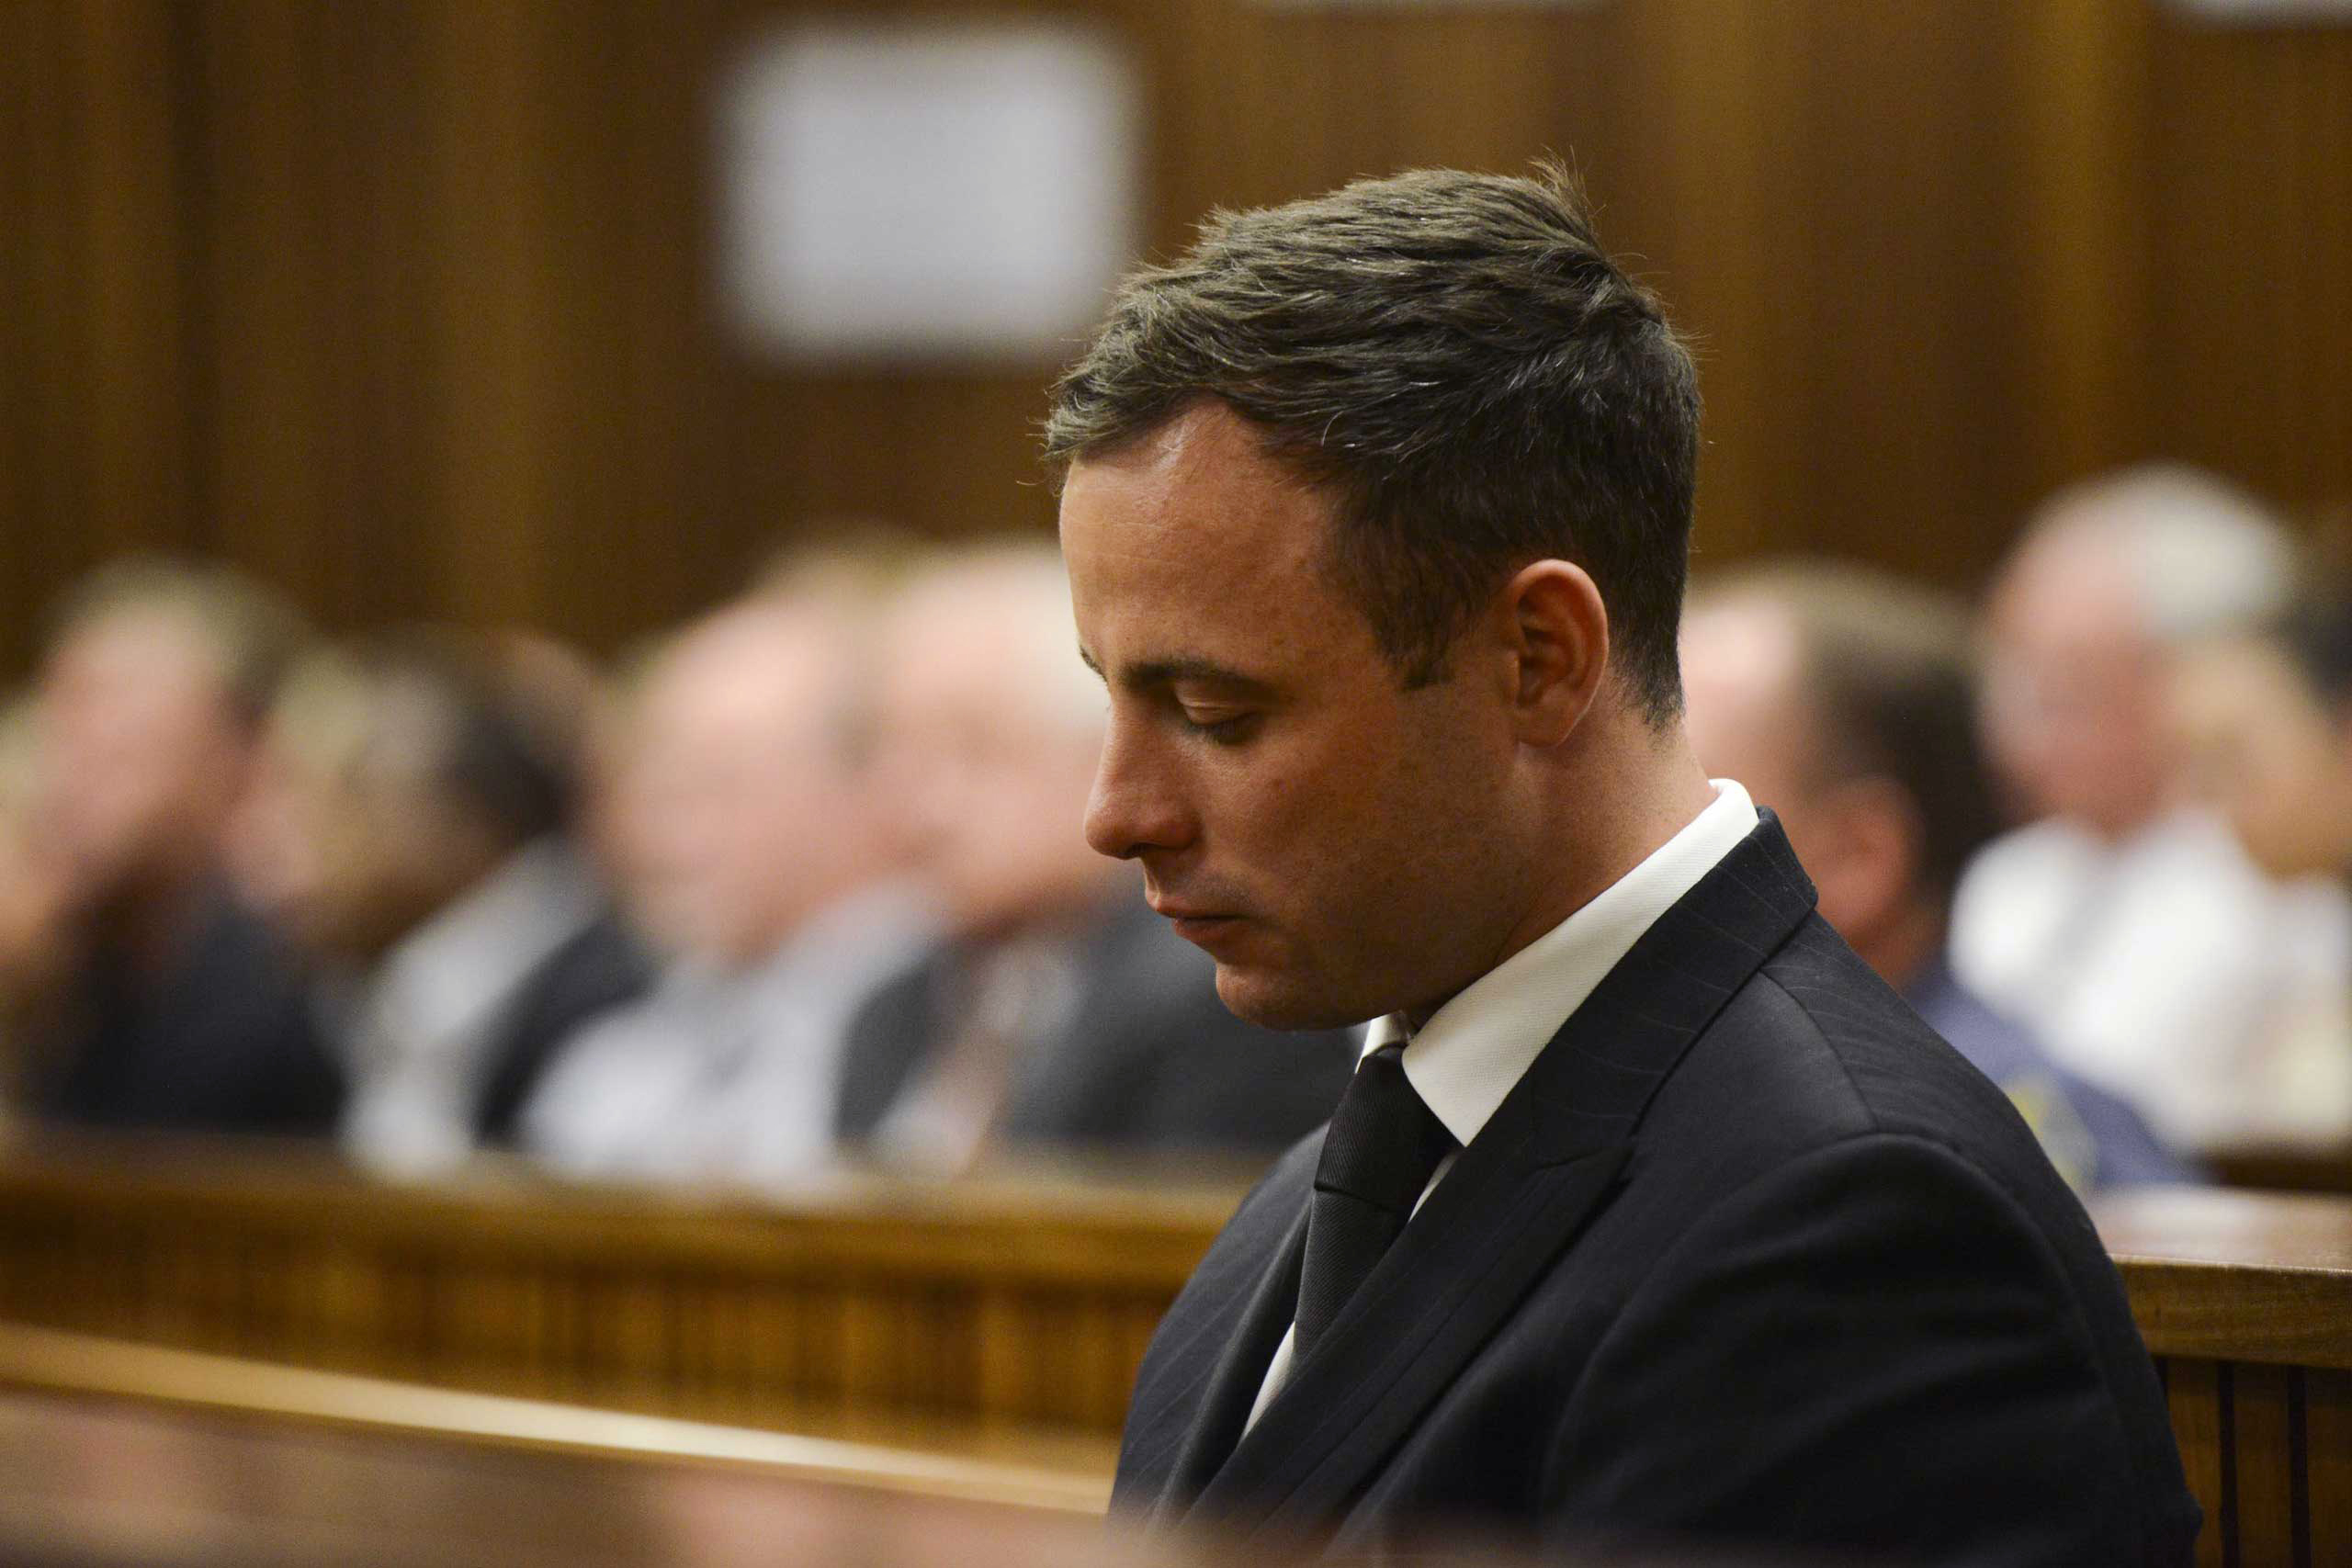 Oscar Pistorius after he is sentenced at the Pretoria High Court on October 21, 2014, in Pretoria, South Africa.